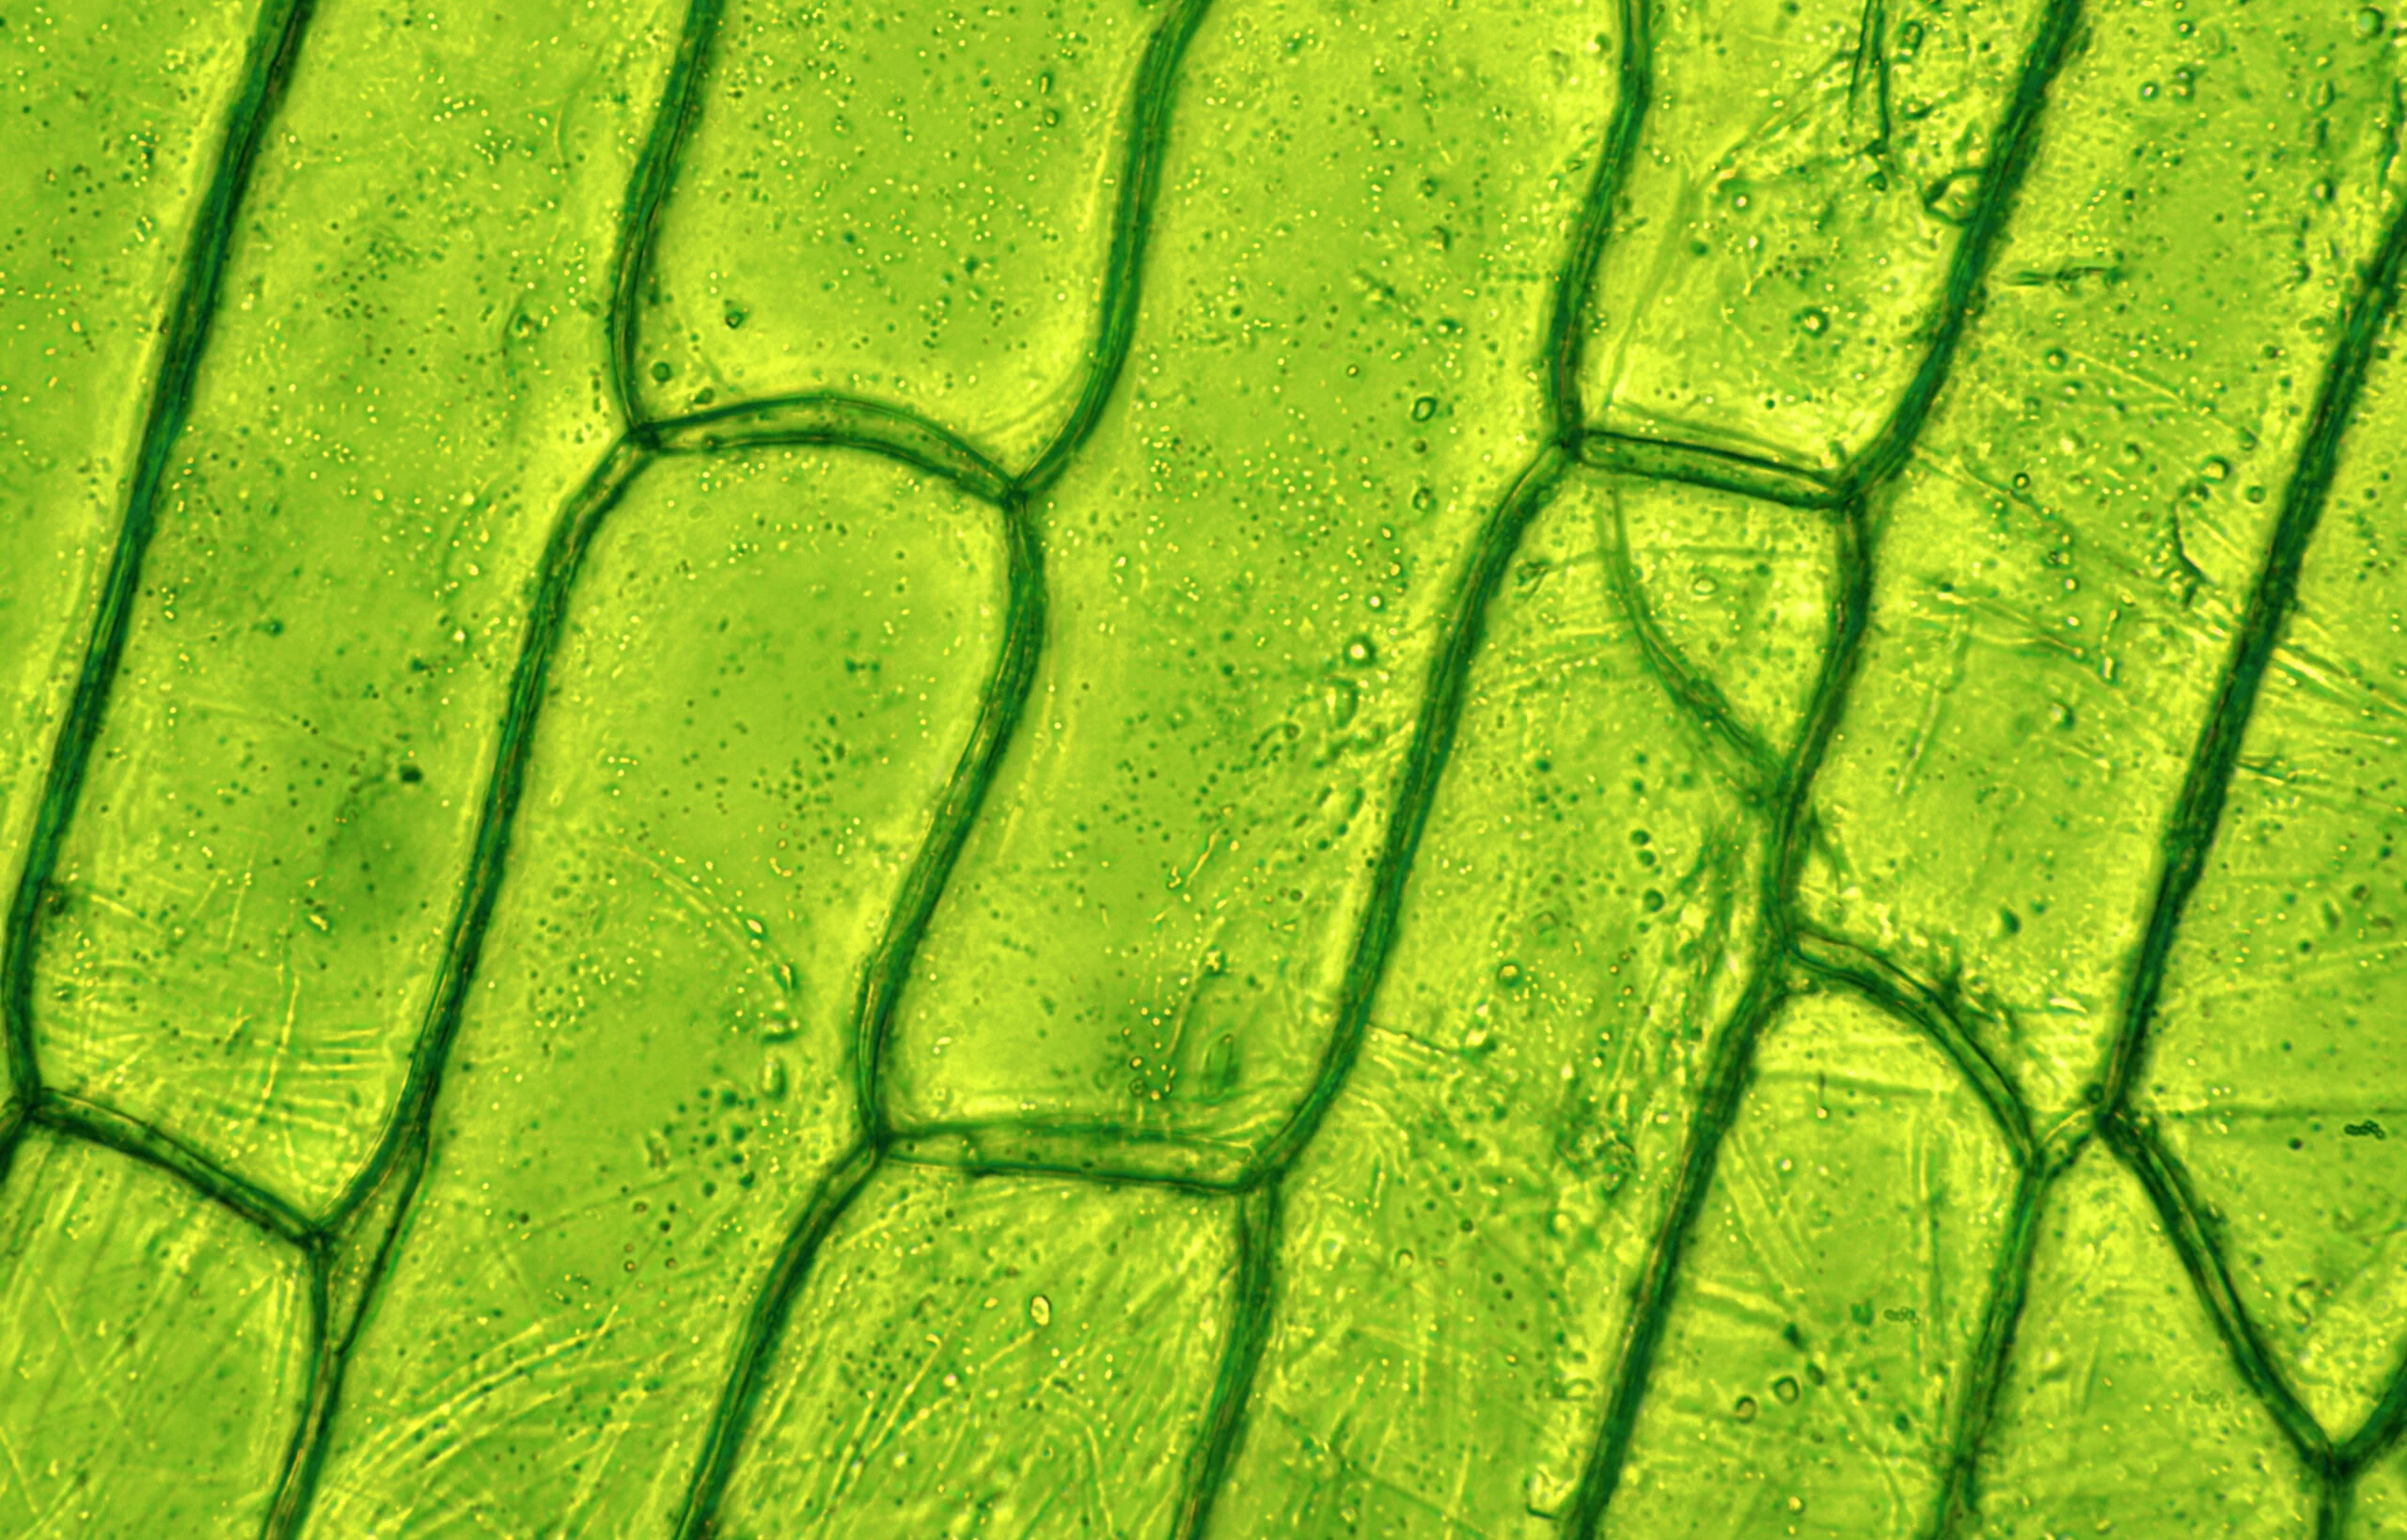 Green leaf under a microscope with individual cells visible